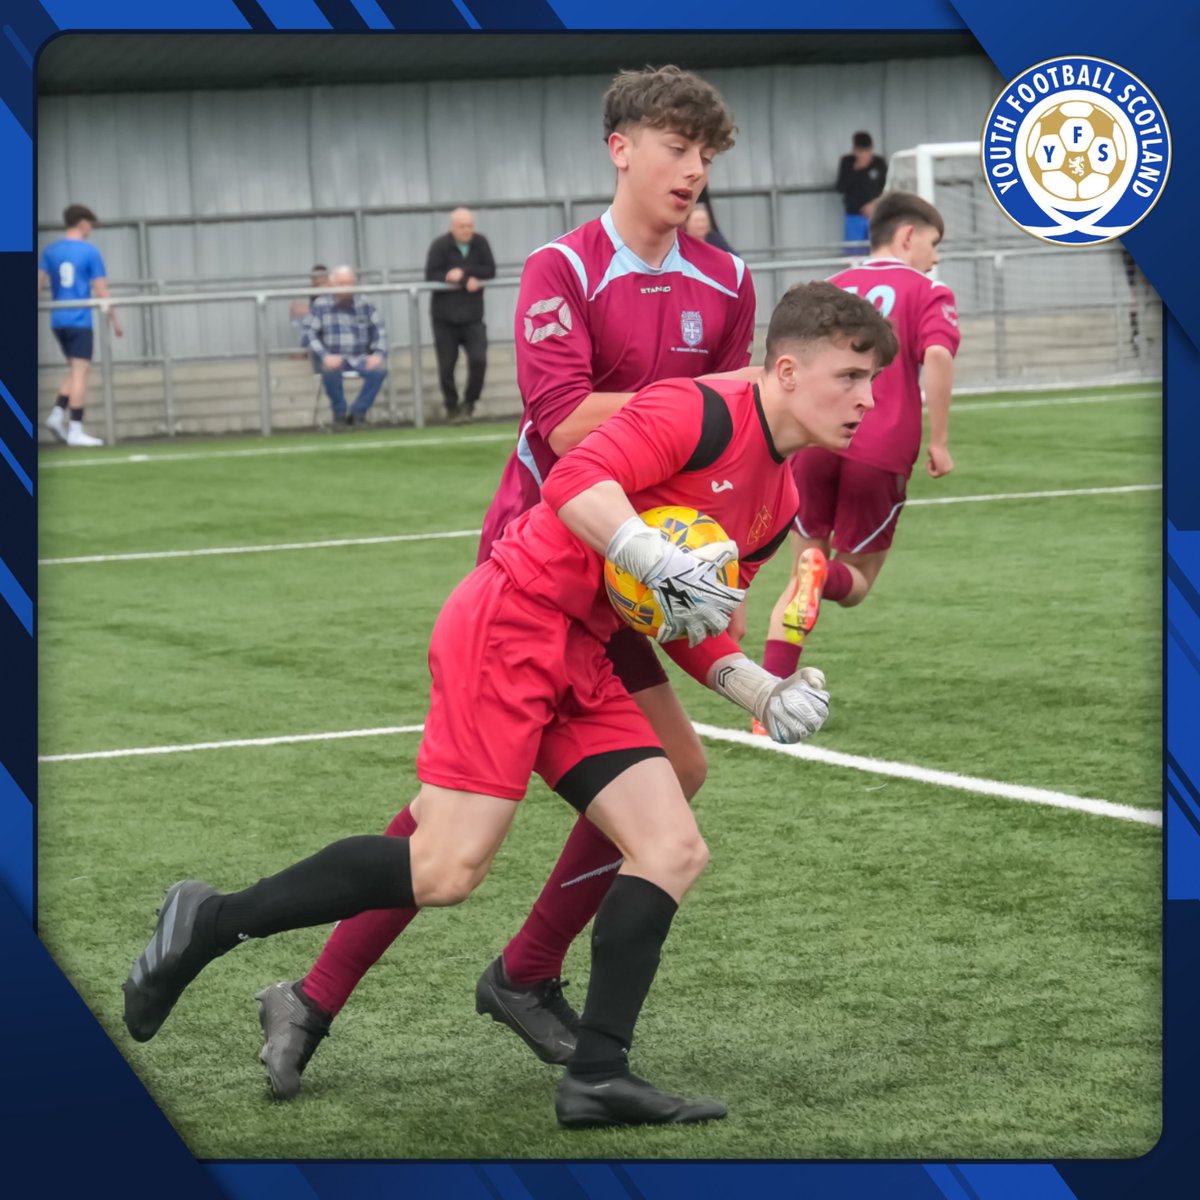 𝗣𝗛𝗢𝗧𝗢 𝗚𝗔𝗟𝗟𝗘𝗥𝗬 📸 Photo gallery, courtesy of 𝗥𝗮𝗰𝗵𝗮𝗲𝗹 𝗕𝘂𝗰𝗵𝗮𝗻𝗮𝗻 from the recent U18 Paisley and District Schools FA Cup Final between @IAHSFball and @snhsfootball. ➡️ View gallery: yfsphotos.co.uk/p597472885